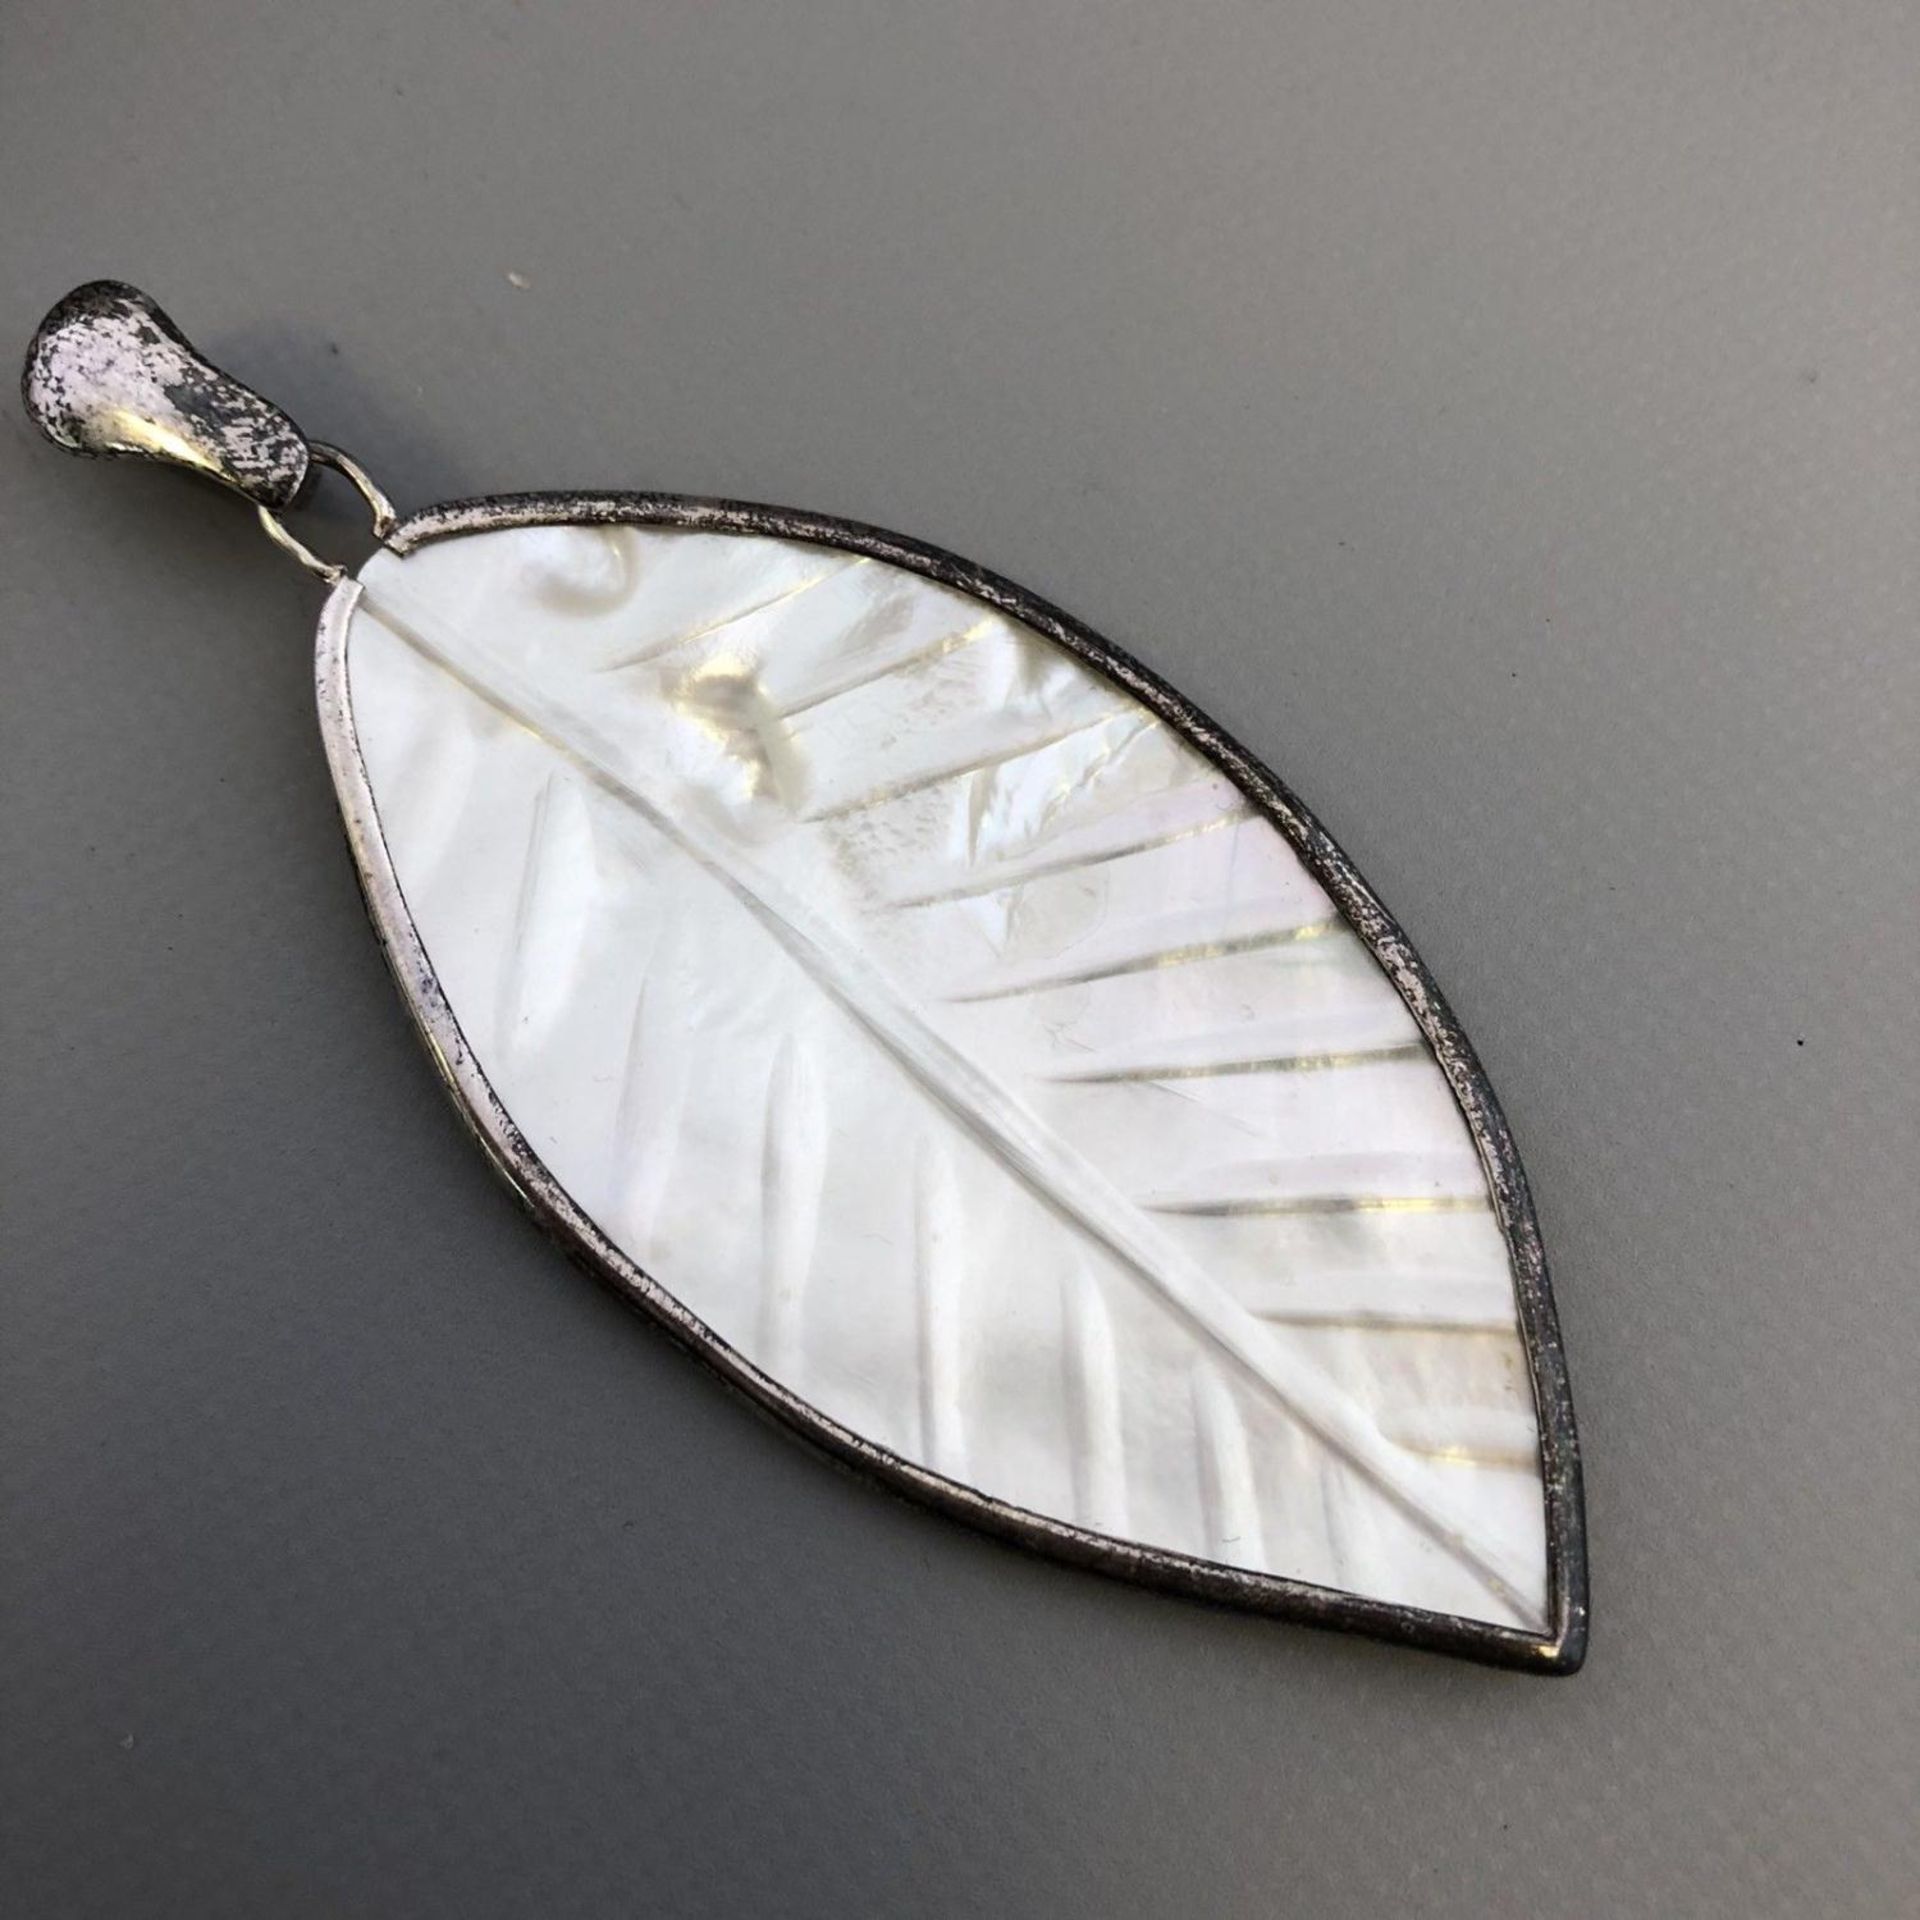 Boxed Stunning Large Mother of Pearl Leaf Statement Pendant with 925 Silver Mount - Image 2 of 3